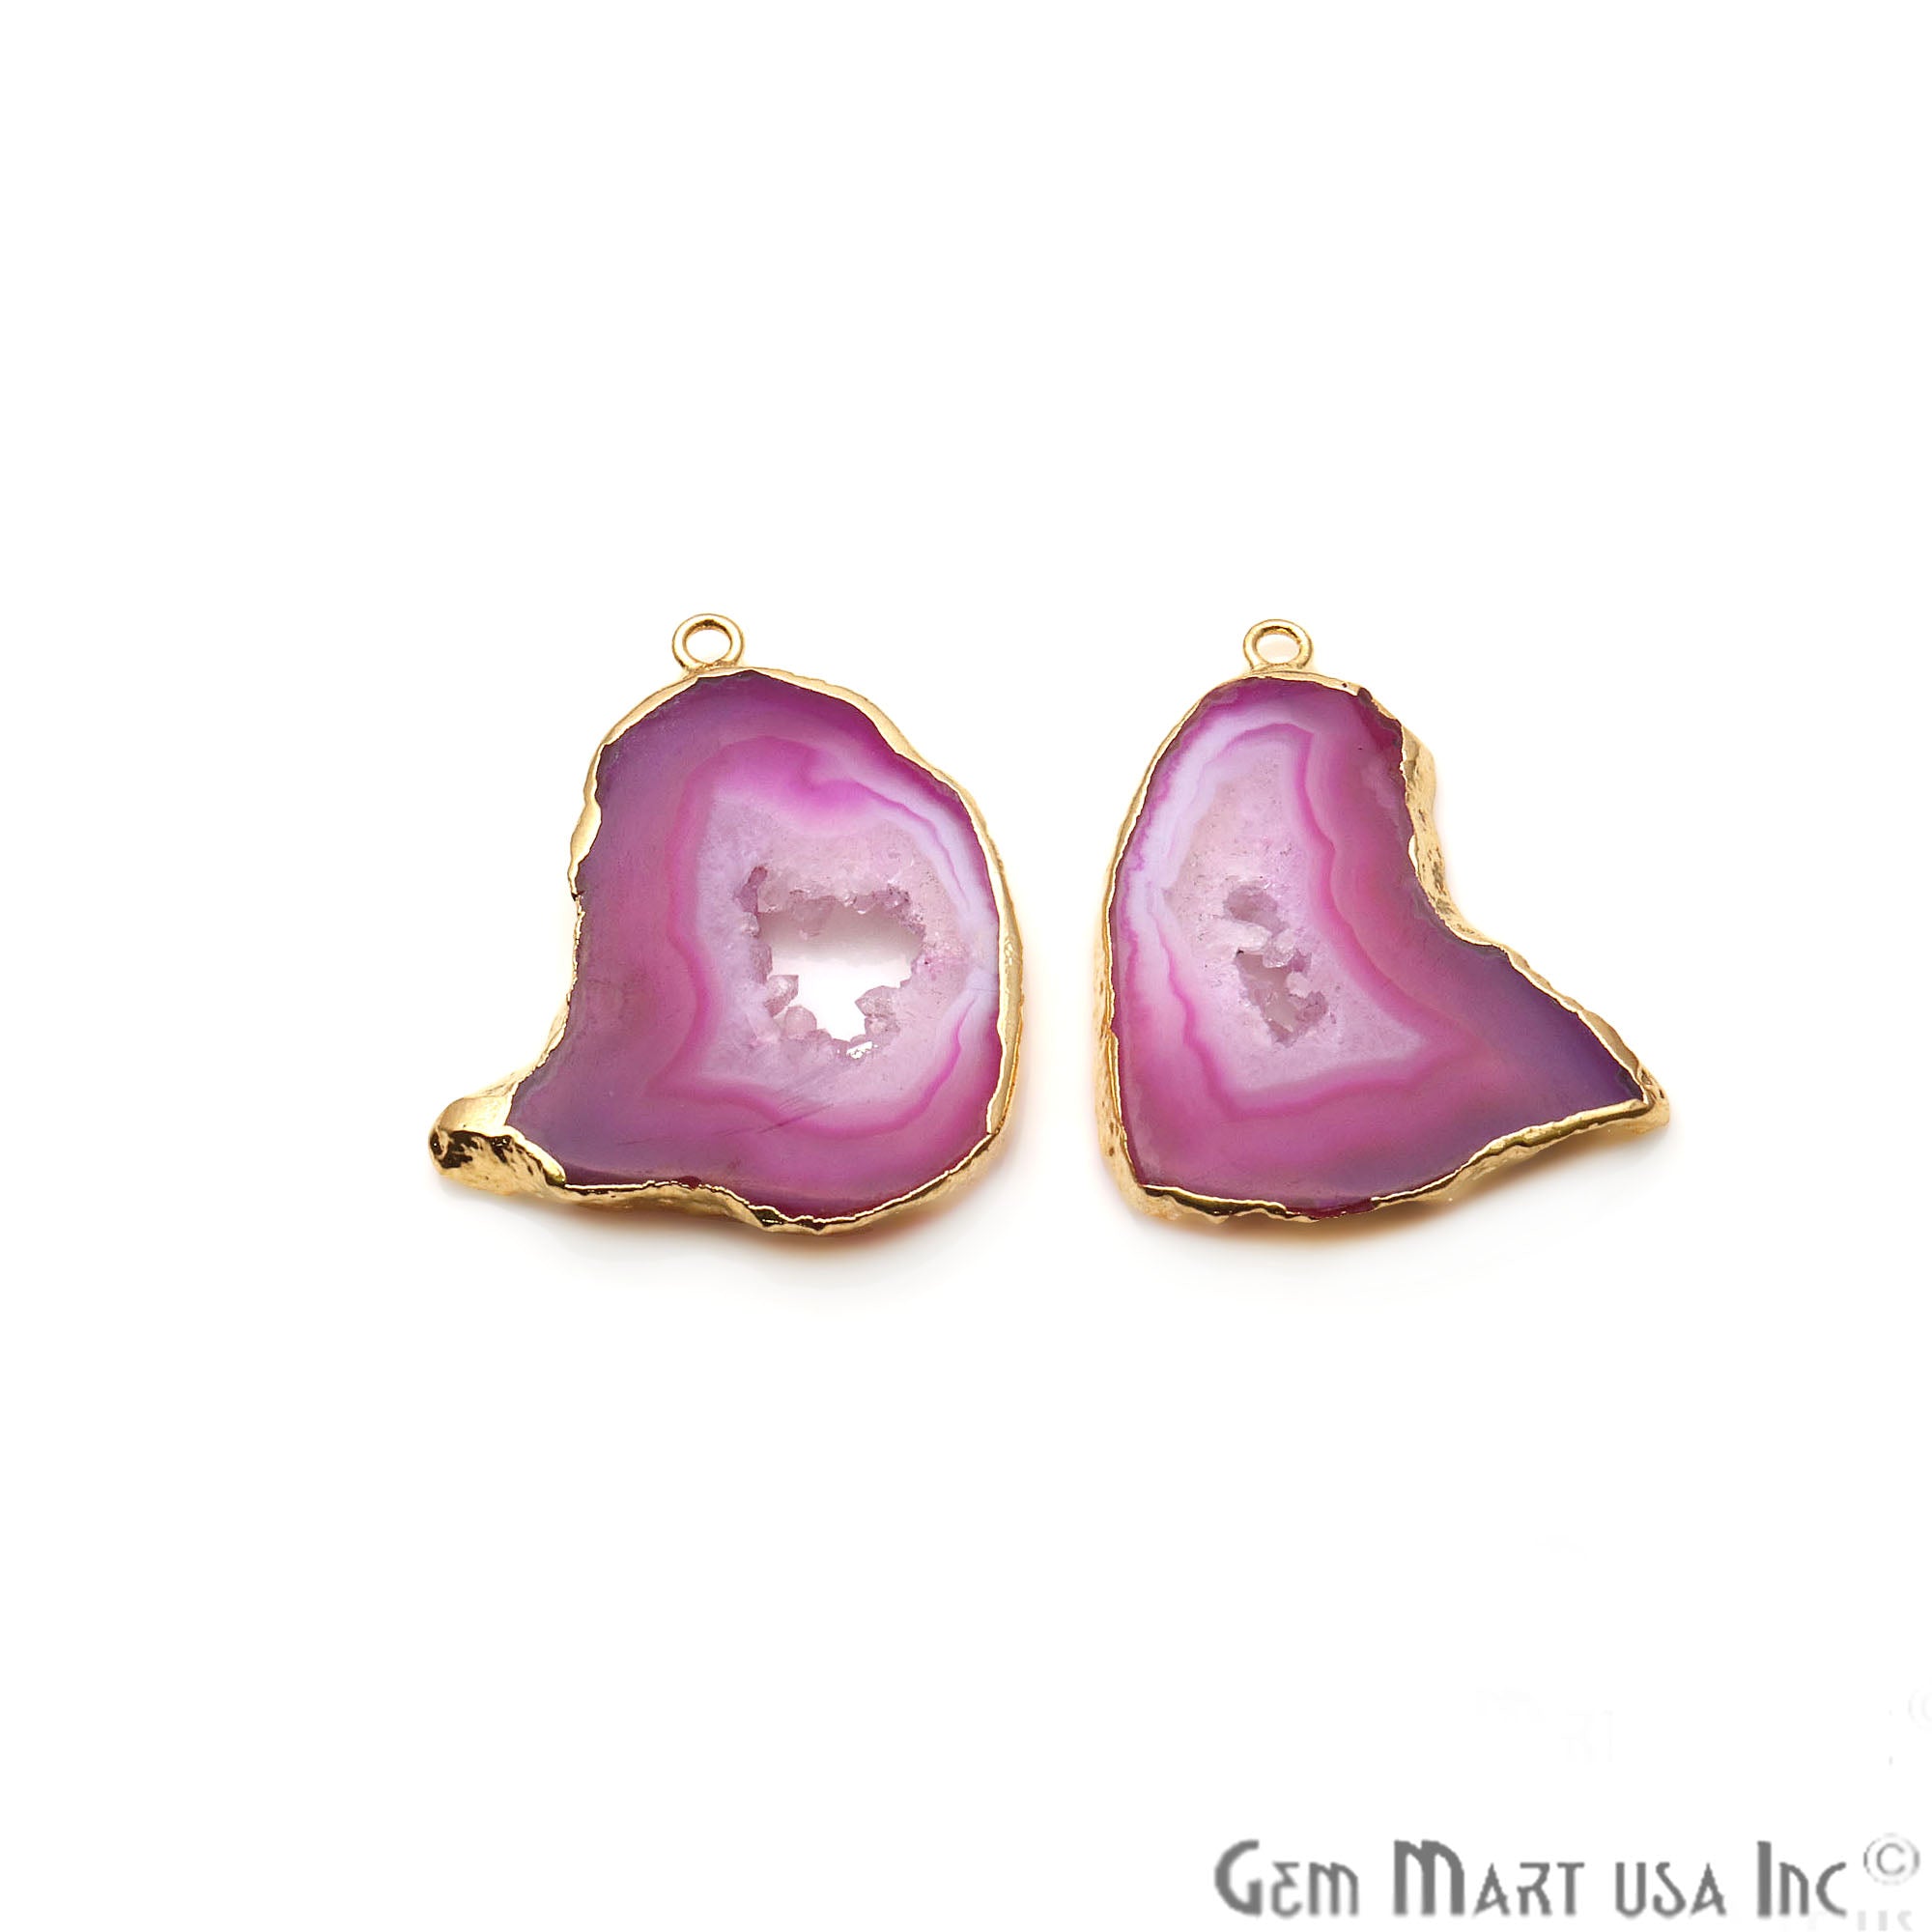 Agate Slice 29x38mm Organic Gold Electroplated Gemstone Earring Connector 1 Pair - GemMartUSA